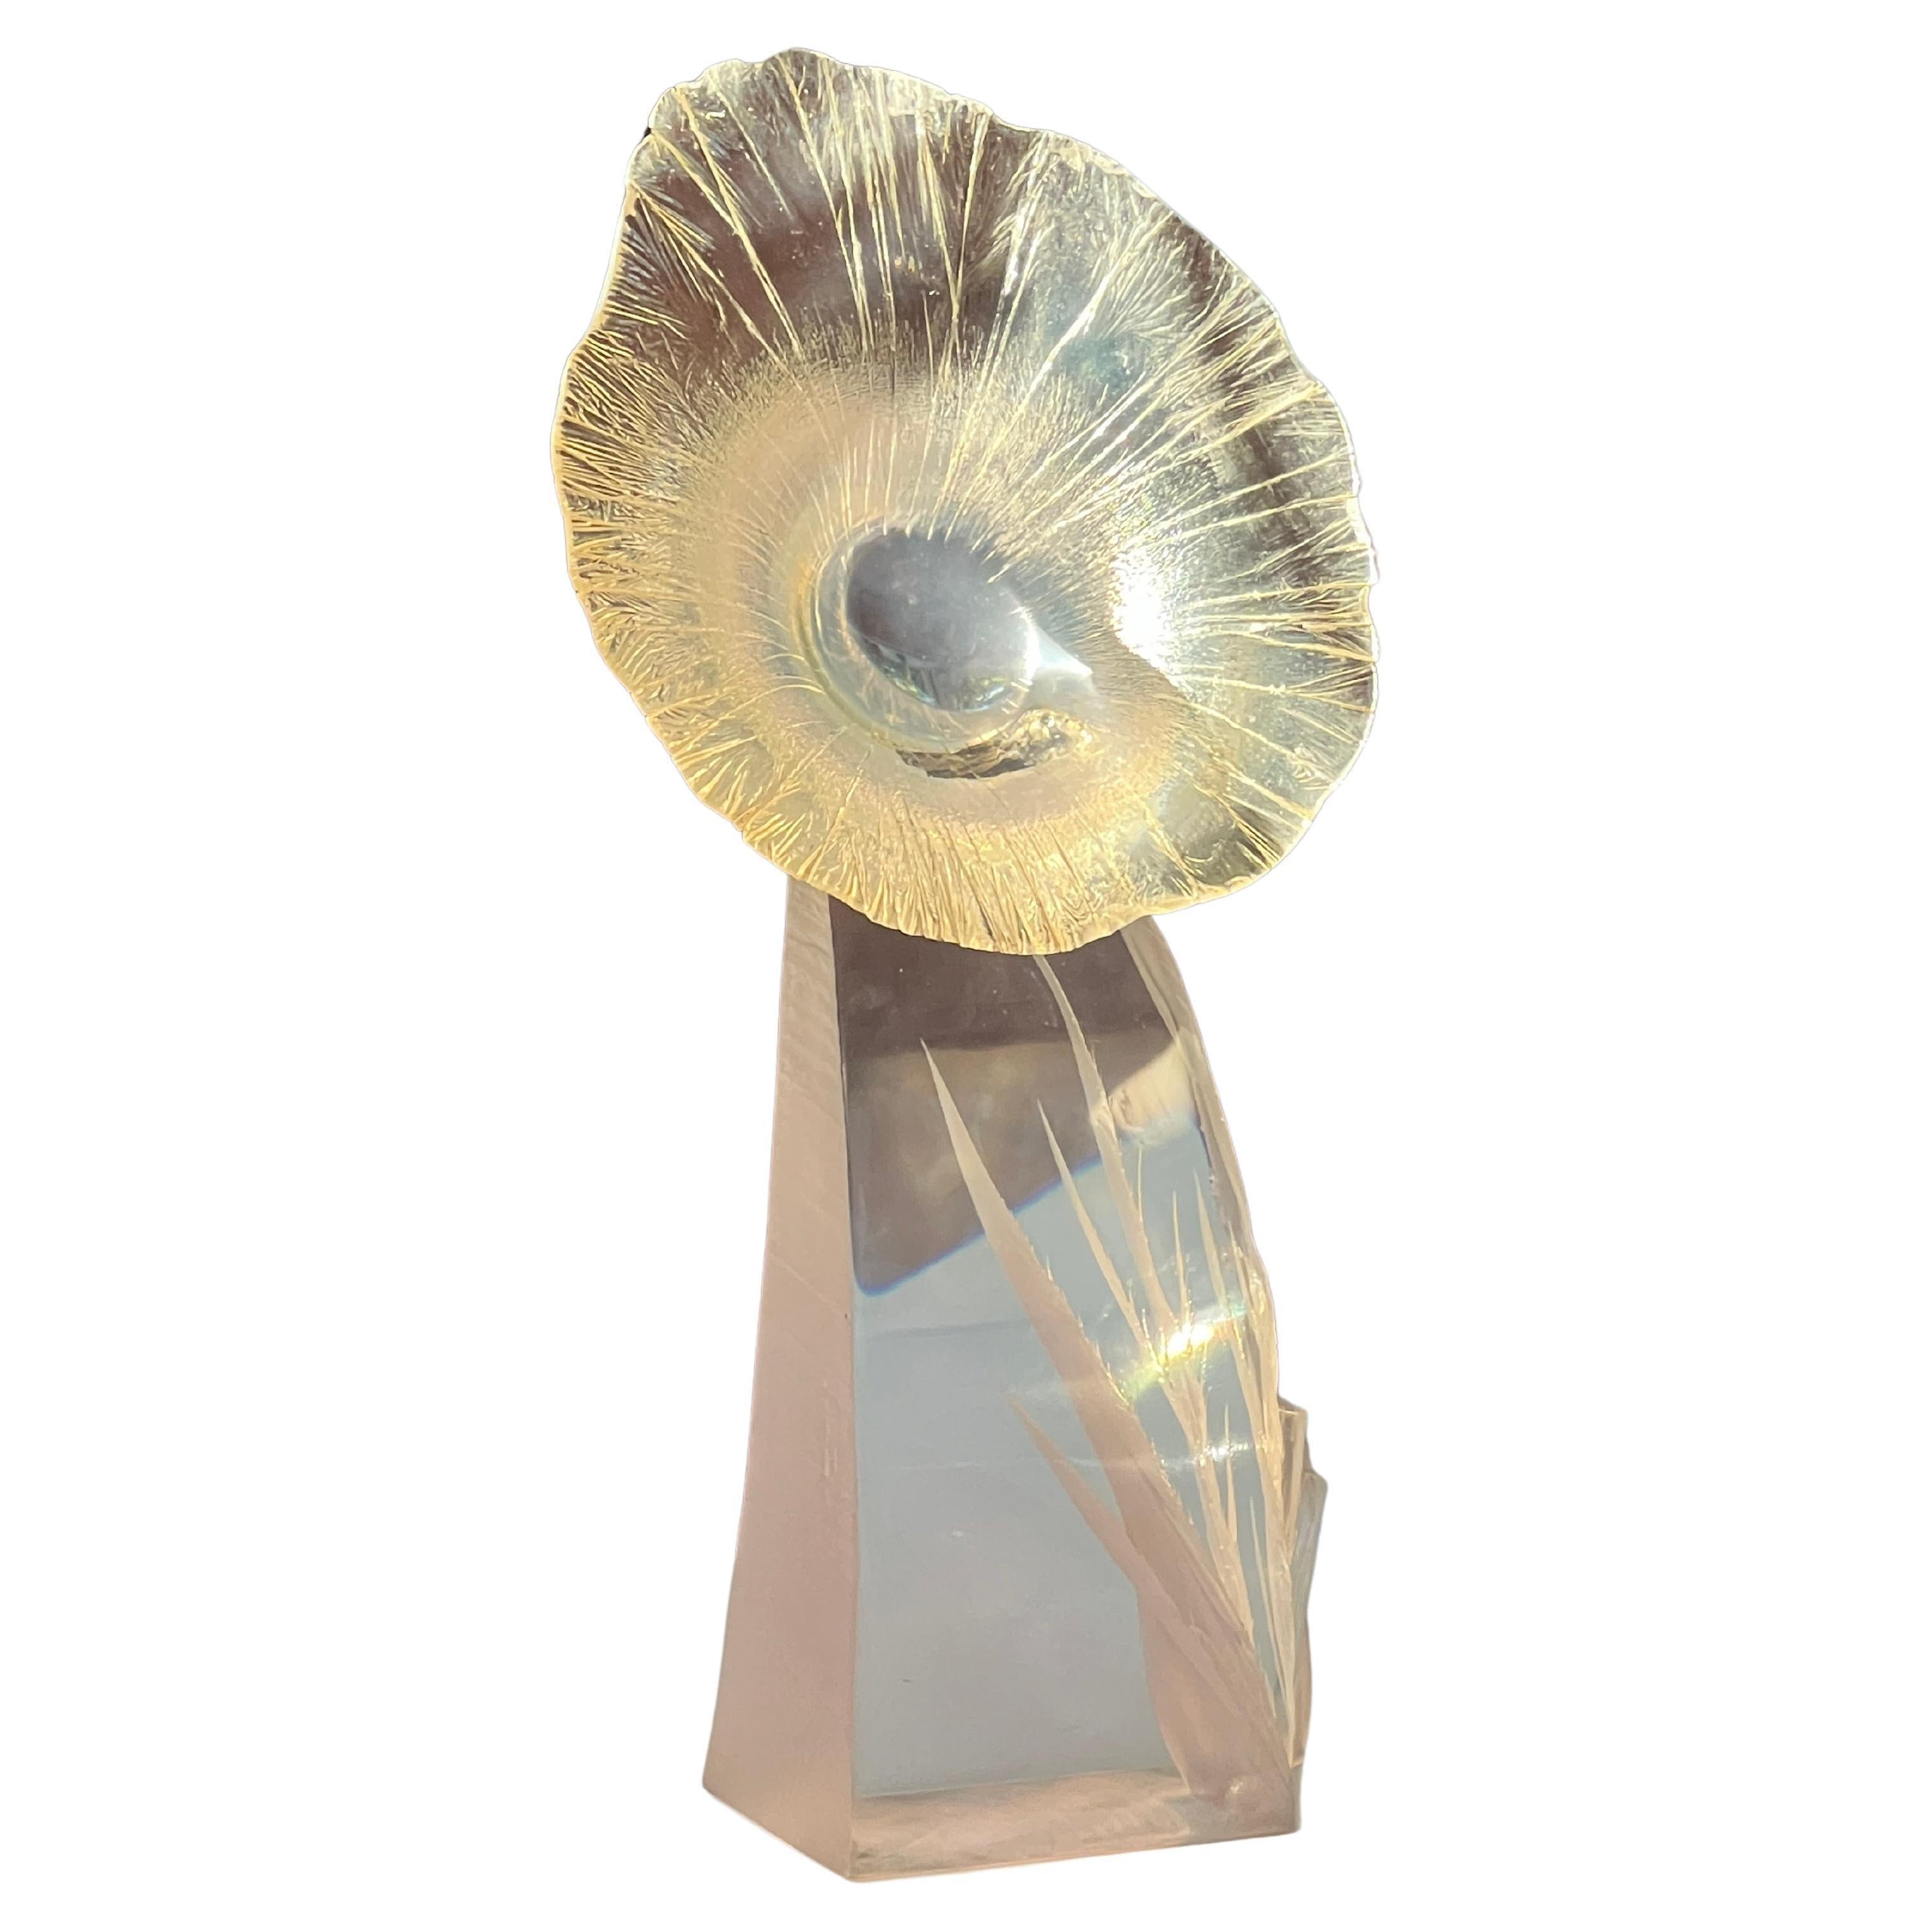 This rare Lucite resin sculpture, bearing the signature of Herb Elsky and dated 1983 on its base, portrays a flower and its stem intricately carved within two acrylic blocks joined together.  It could be a phantasmal sunflower in the color of